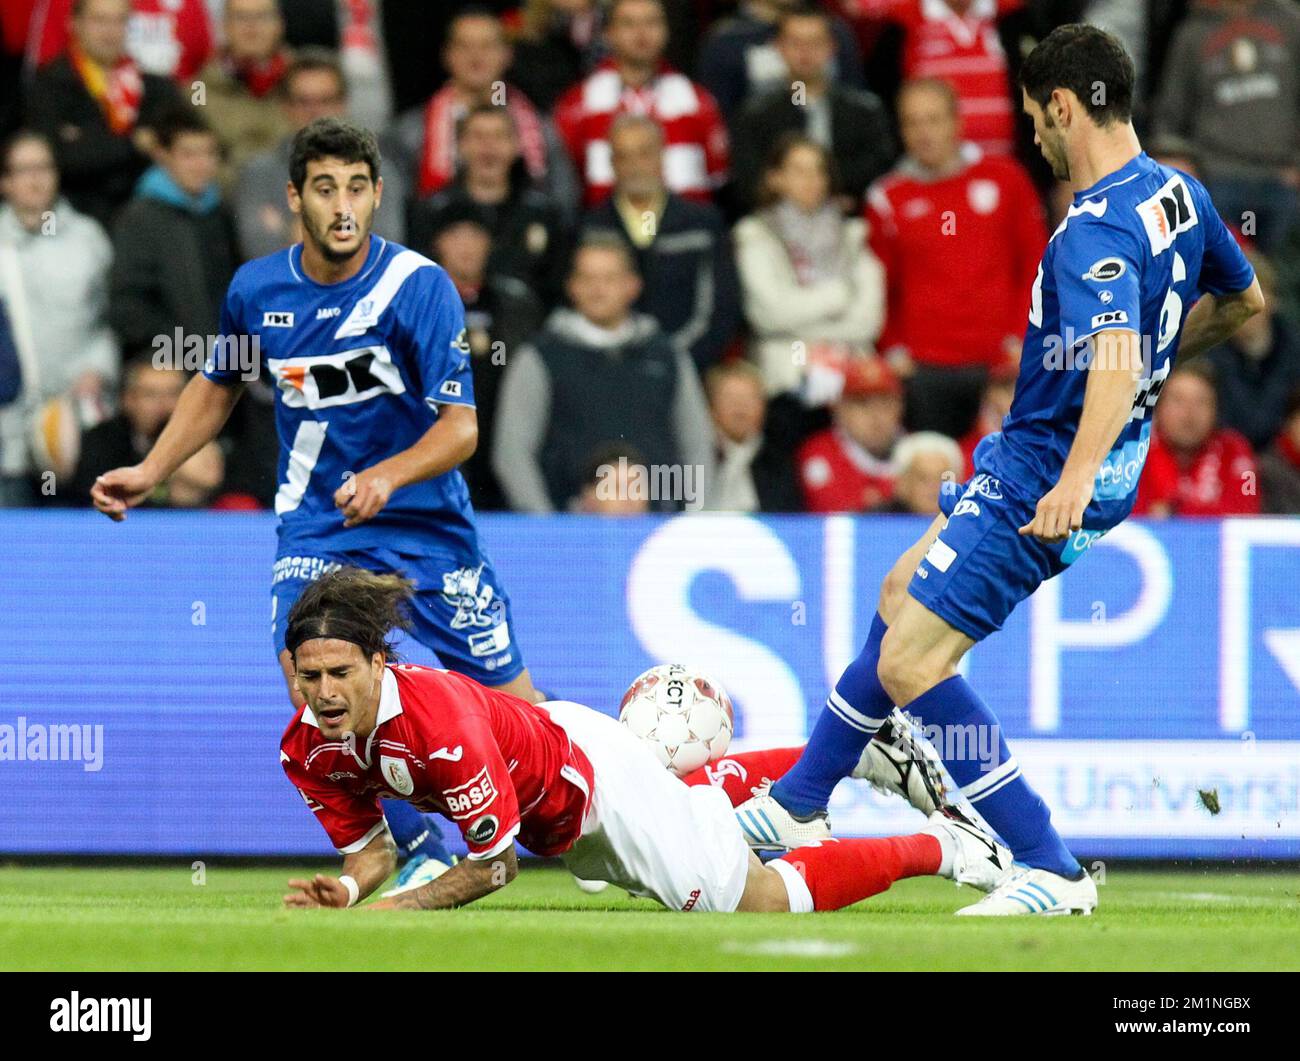 20120921 - LIEGE, BELGIUM: Standard's Maor Bar Buzaglo and Gent's Juan Albert Andreu 'Melli' Alvarado fight for the ball during the Jupiler Pro League match between Standard de Liege and AA Gent, in Liege, Friday 21 September 2012, on the 8th day of the Belgian soccer championship. BELGA PHOTO VIRGINIE LEFOUR Stock Photo